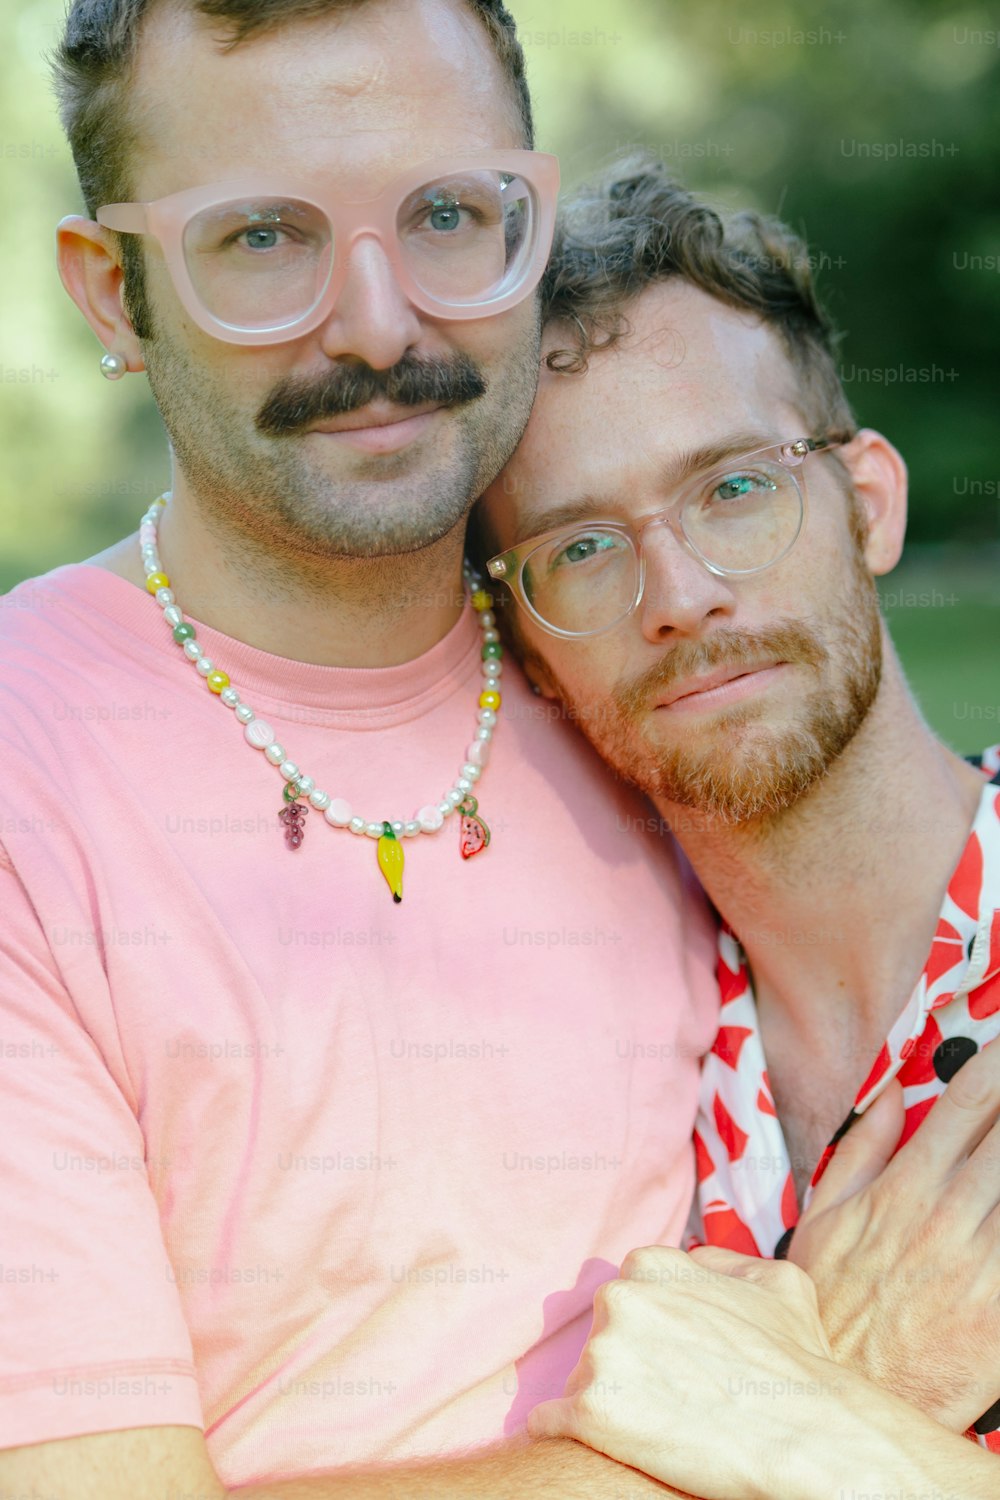 a man with a mustache and glasses hugging another man